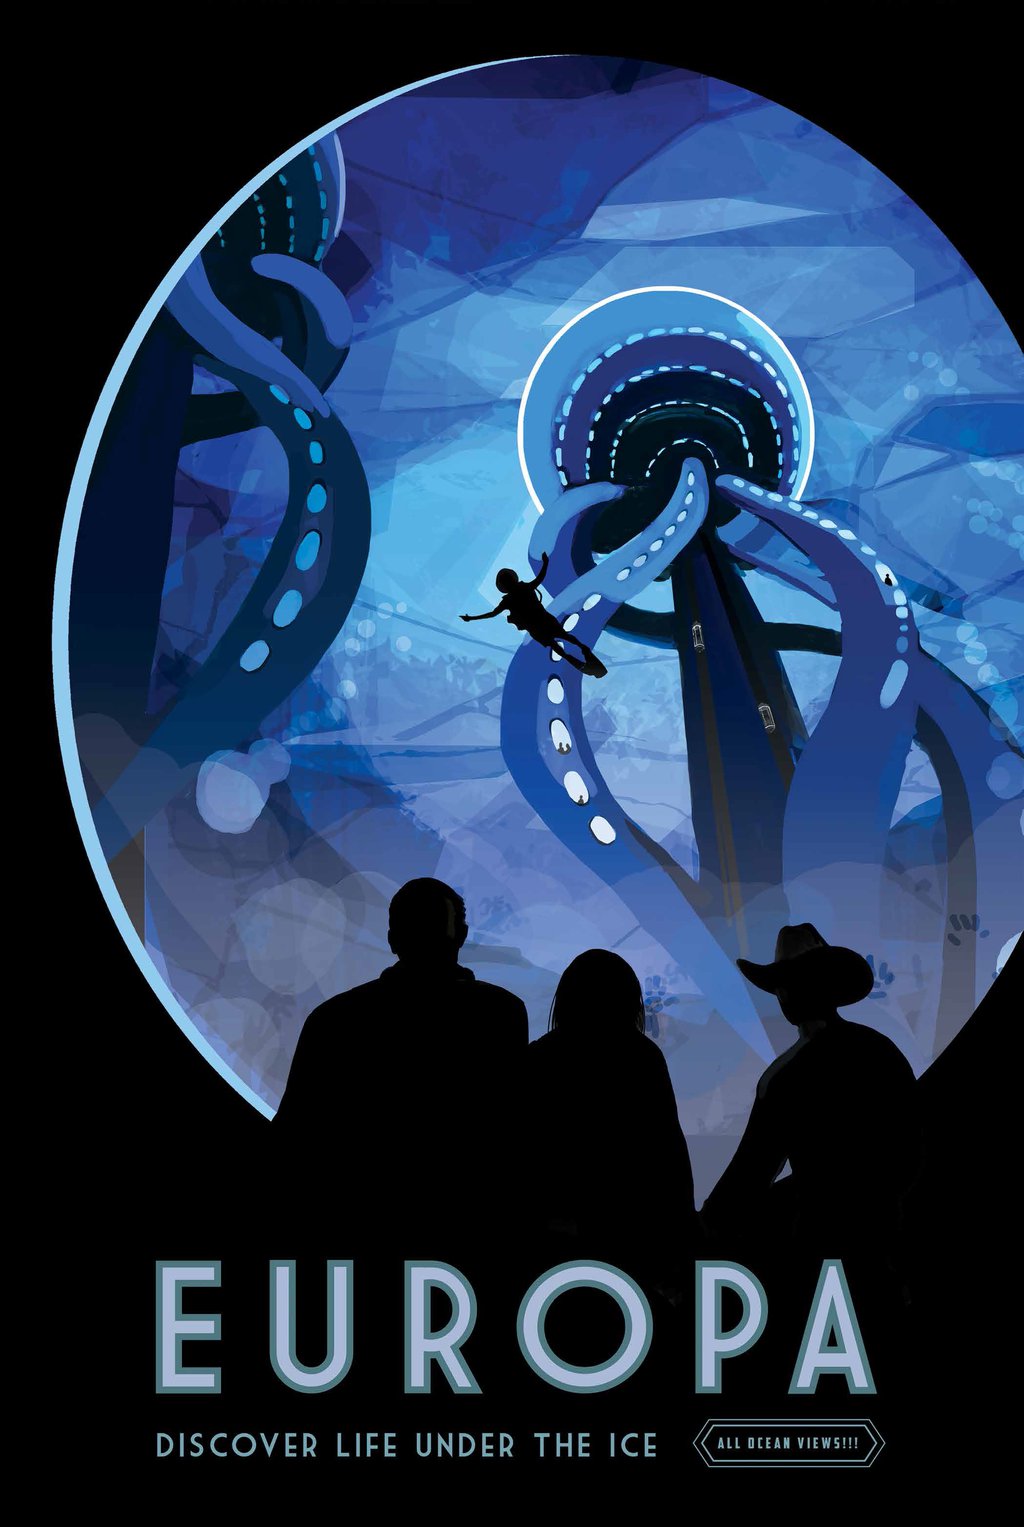 Europa - JPL Travel Poster - Visions of the Future Collection